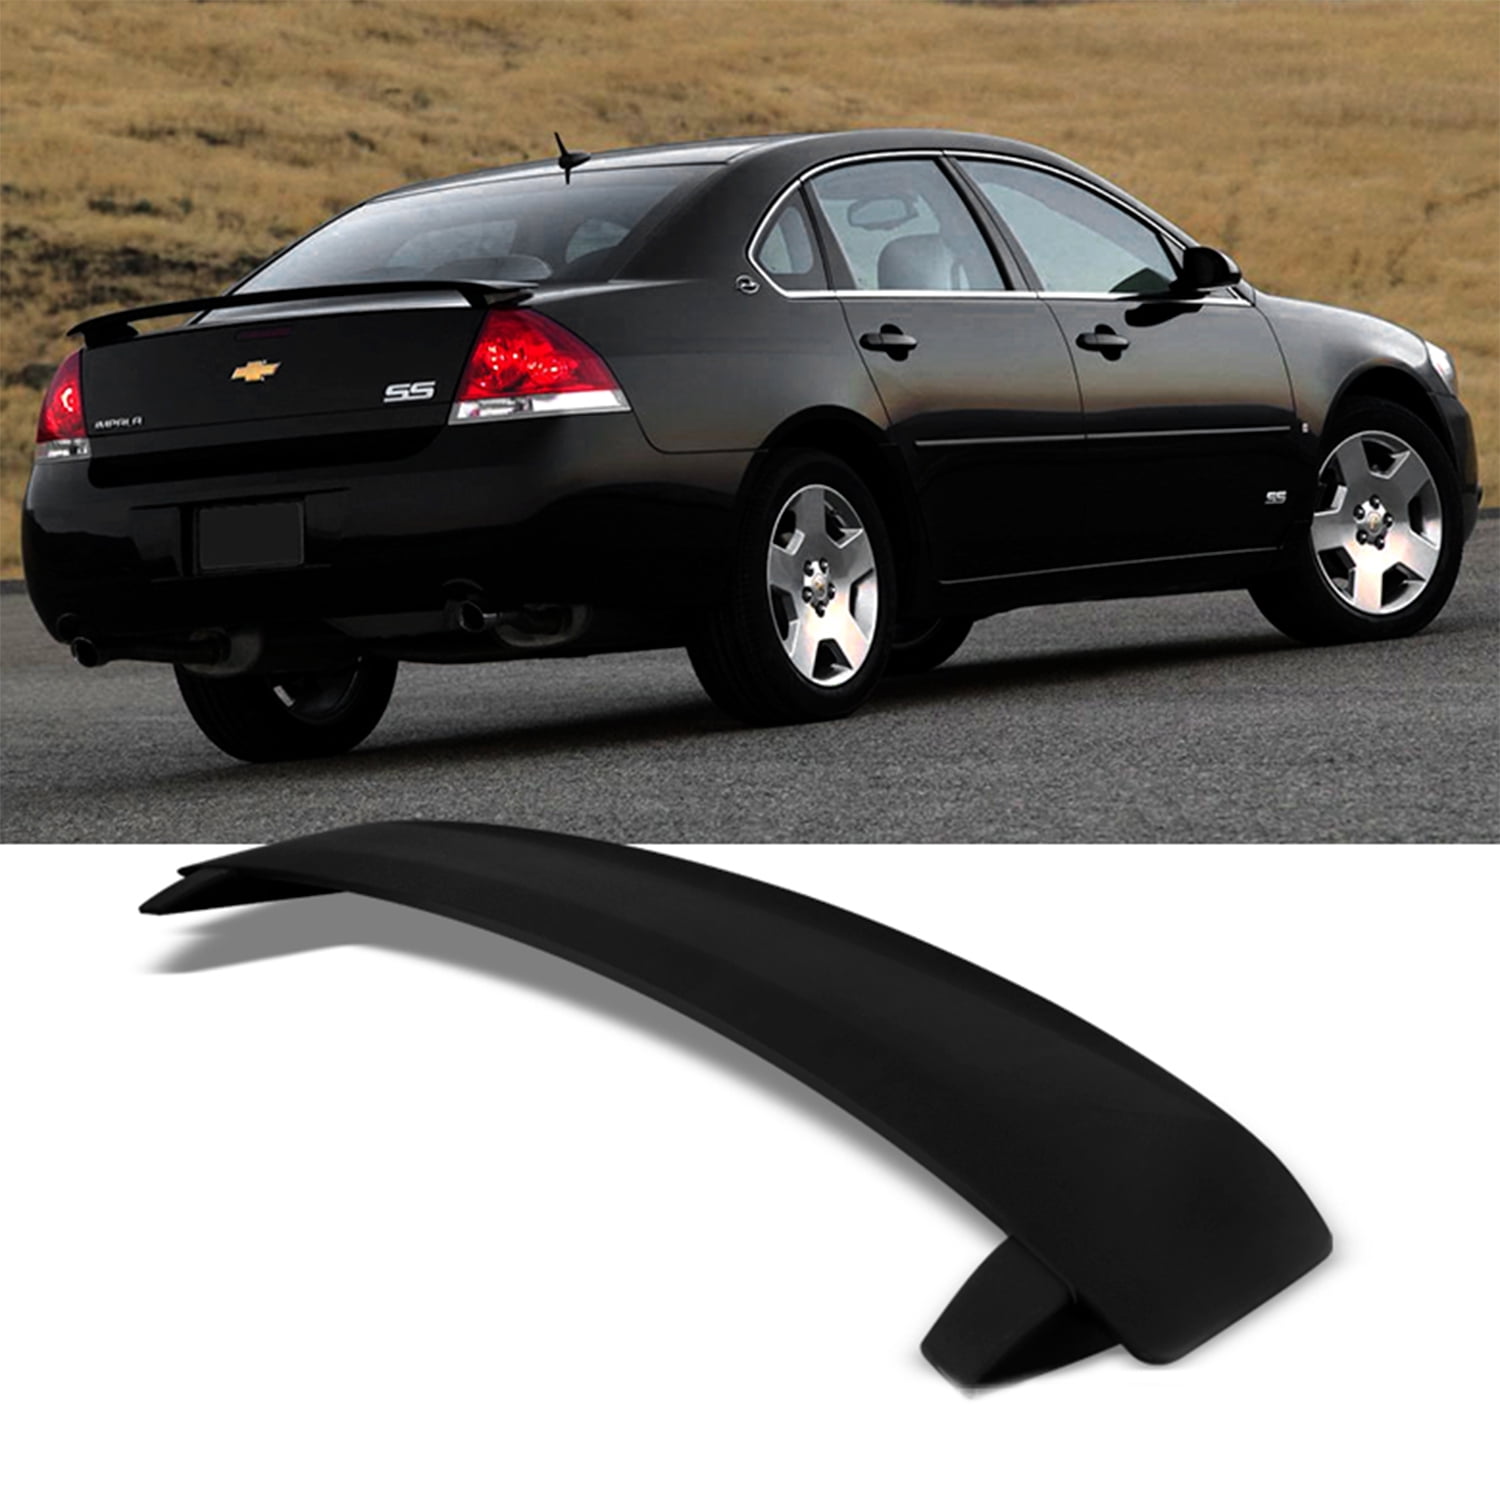 NAGD For 2006-2013 Chevrolet Impala & 2014-2016 Chevrolet Impala Limited 4 Door Sedan Driver/Left Side Front Door Window Replacement Glass 